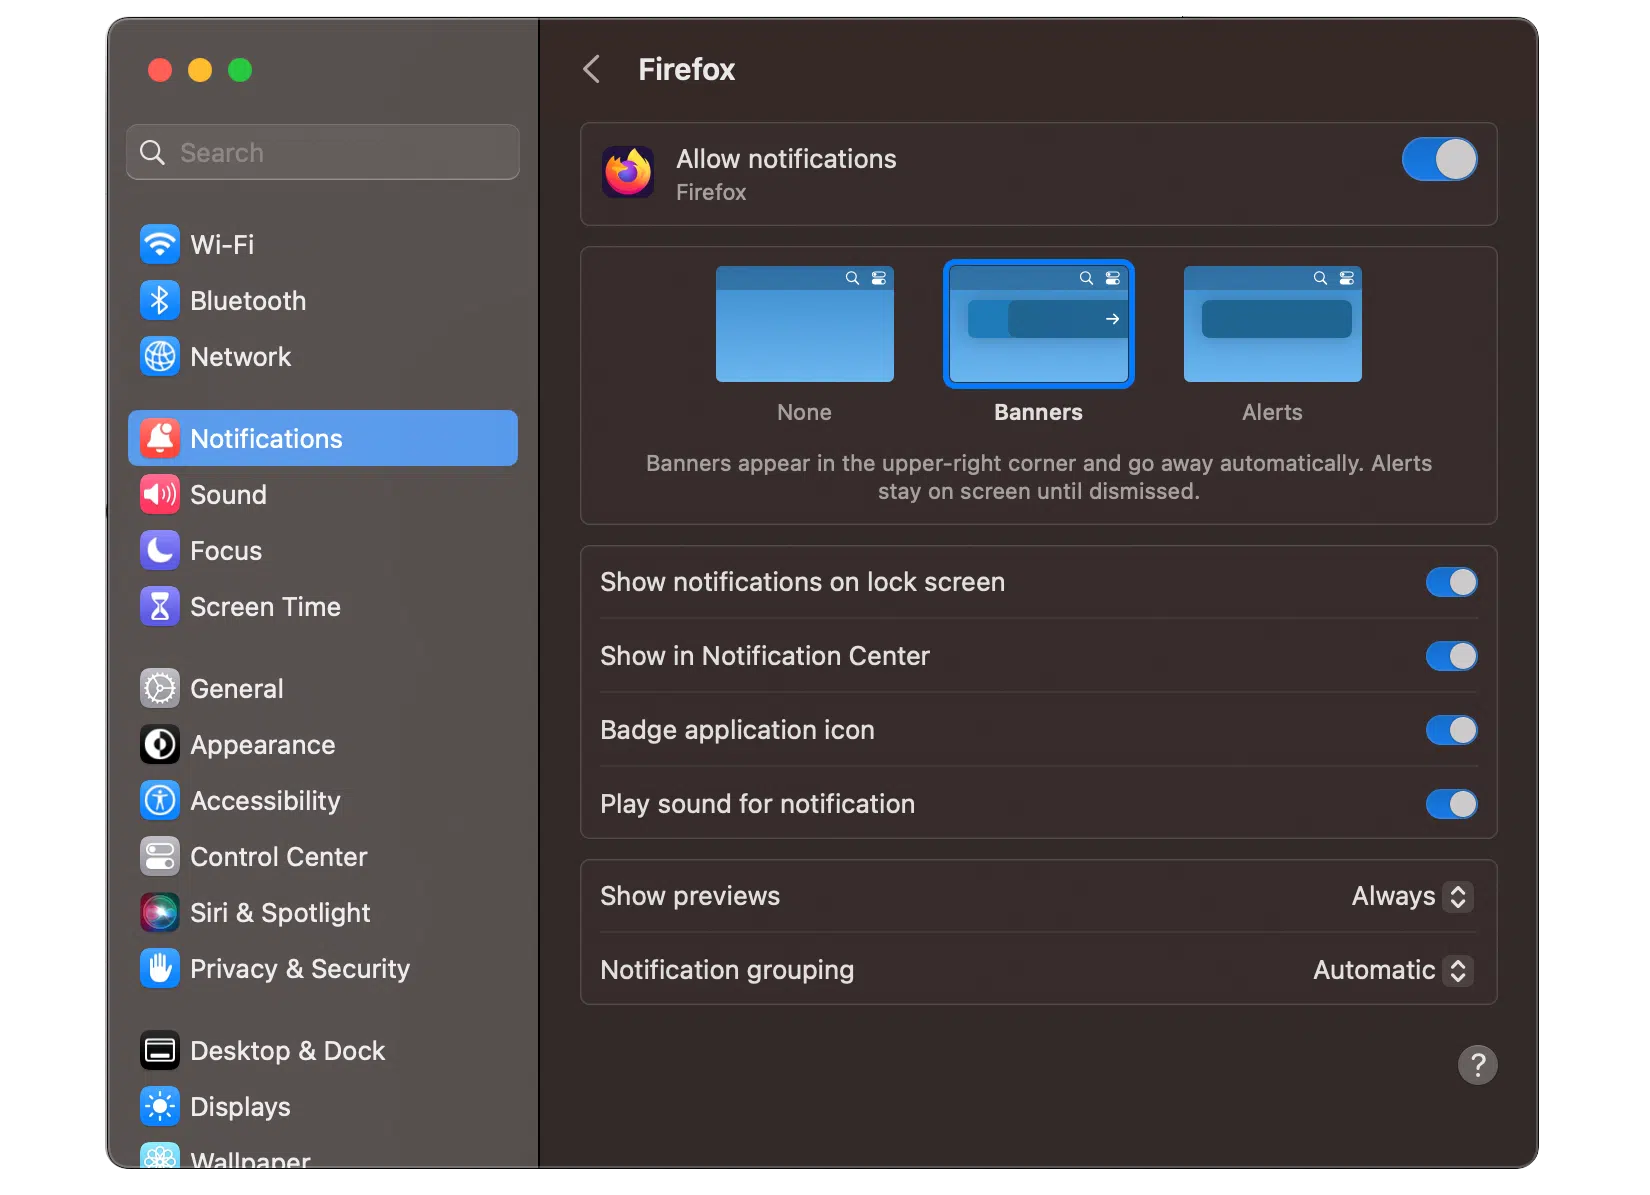 Push notification settings for Firefox in MacOS